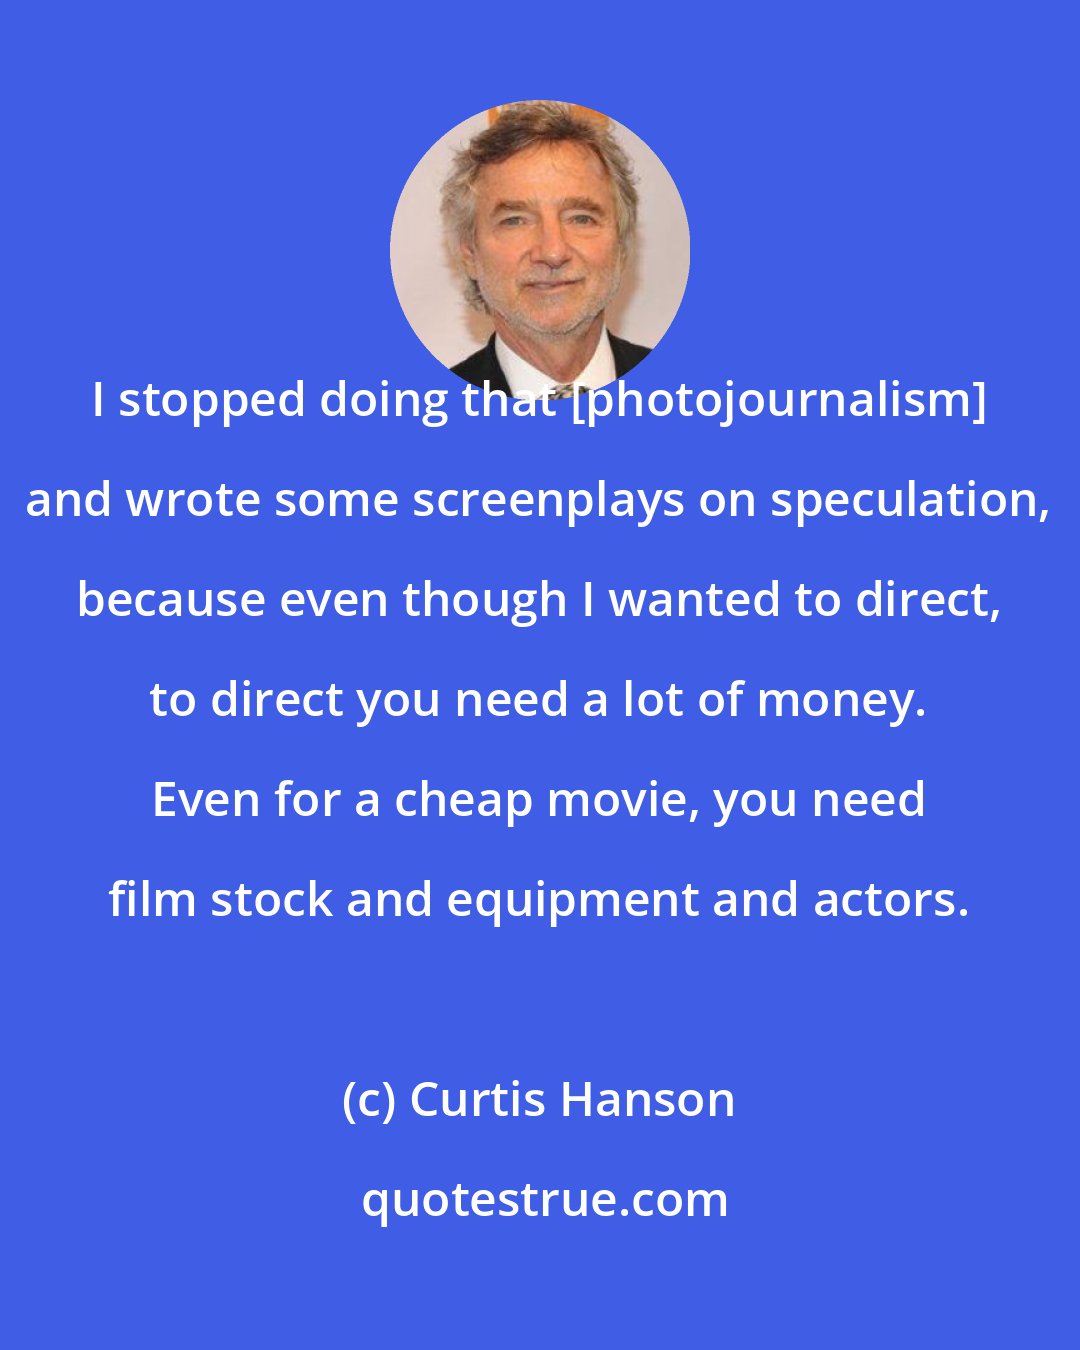 Curtis Hanson: I stopped doing that [photojournalism] and wrote some screenplays on speculation, because even though I wanted to direct, to direct you need a lot of money. Even for a cheap movie, you need film stock and equipment and actors.